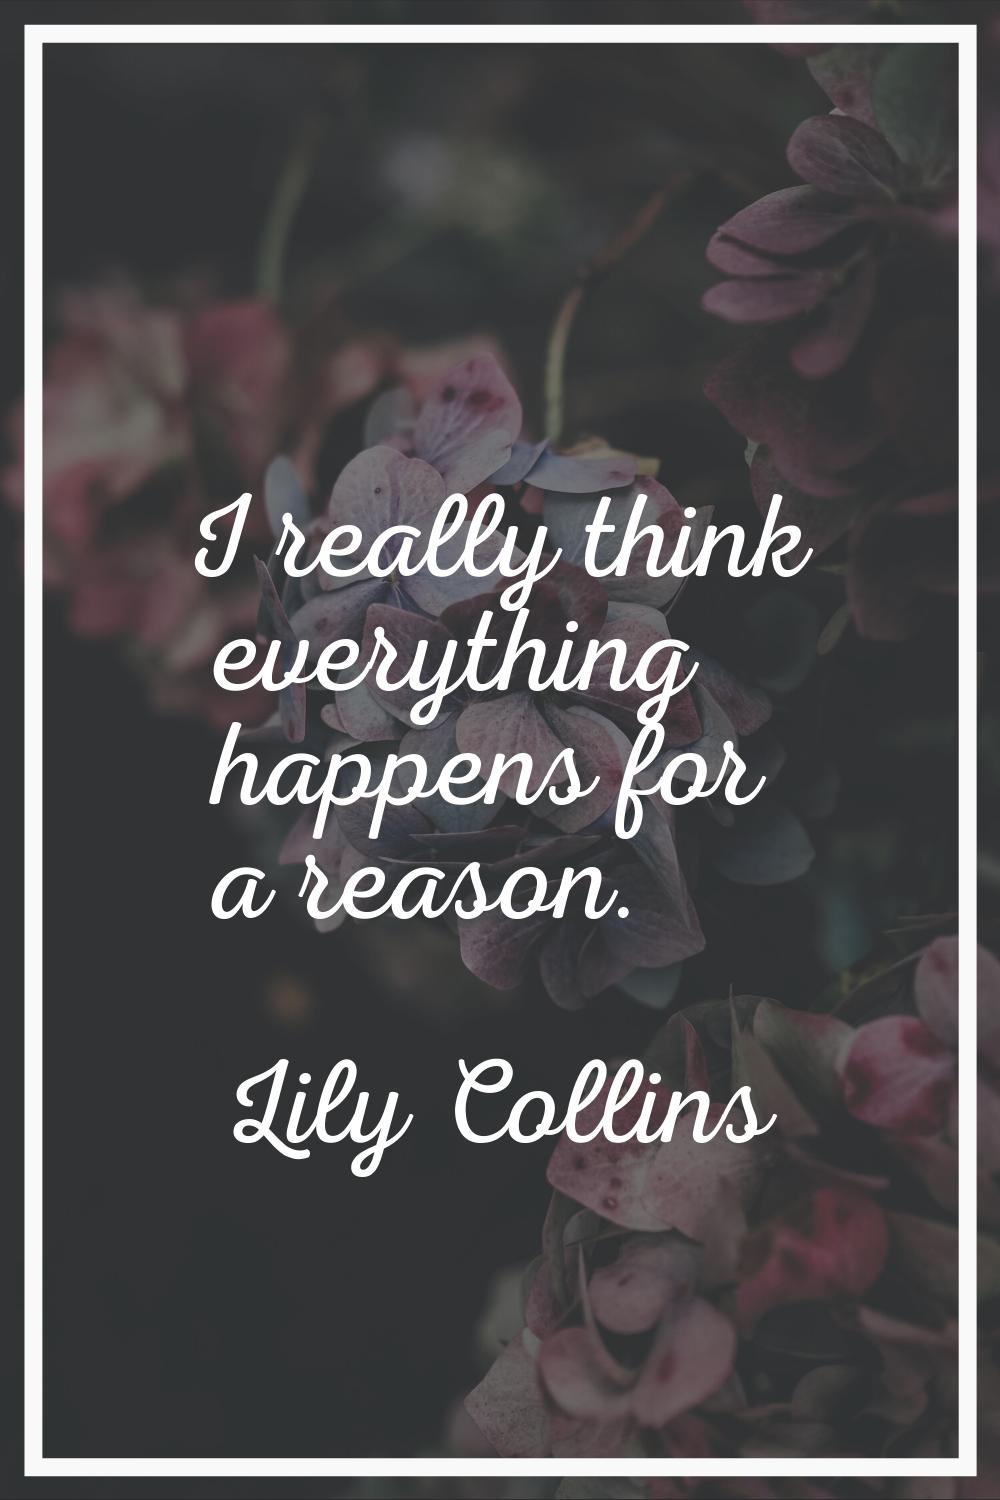 I really think everything happens for a reason.